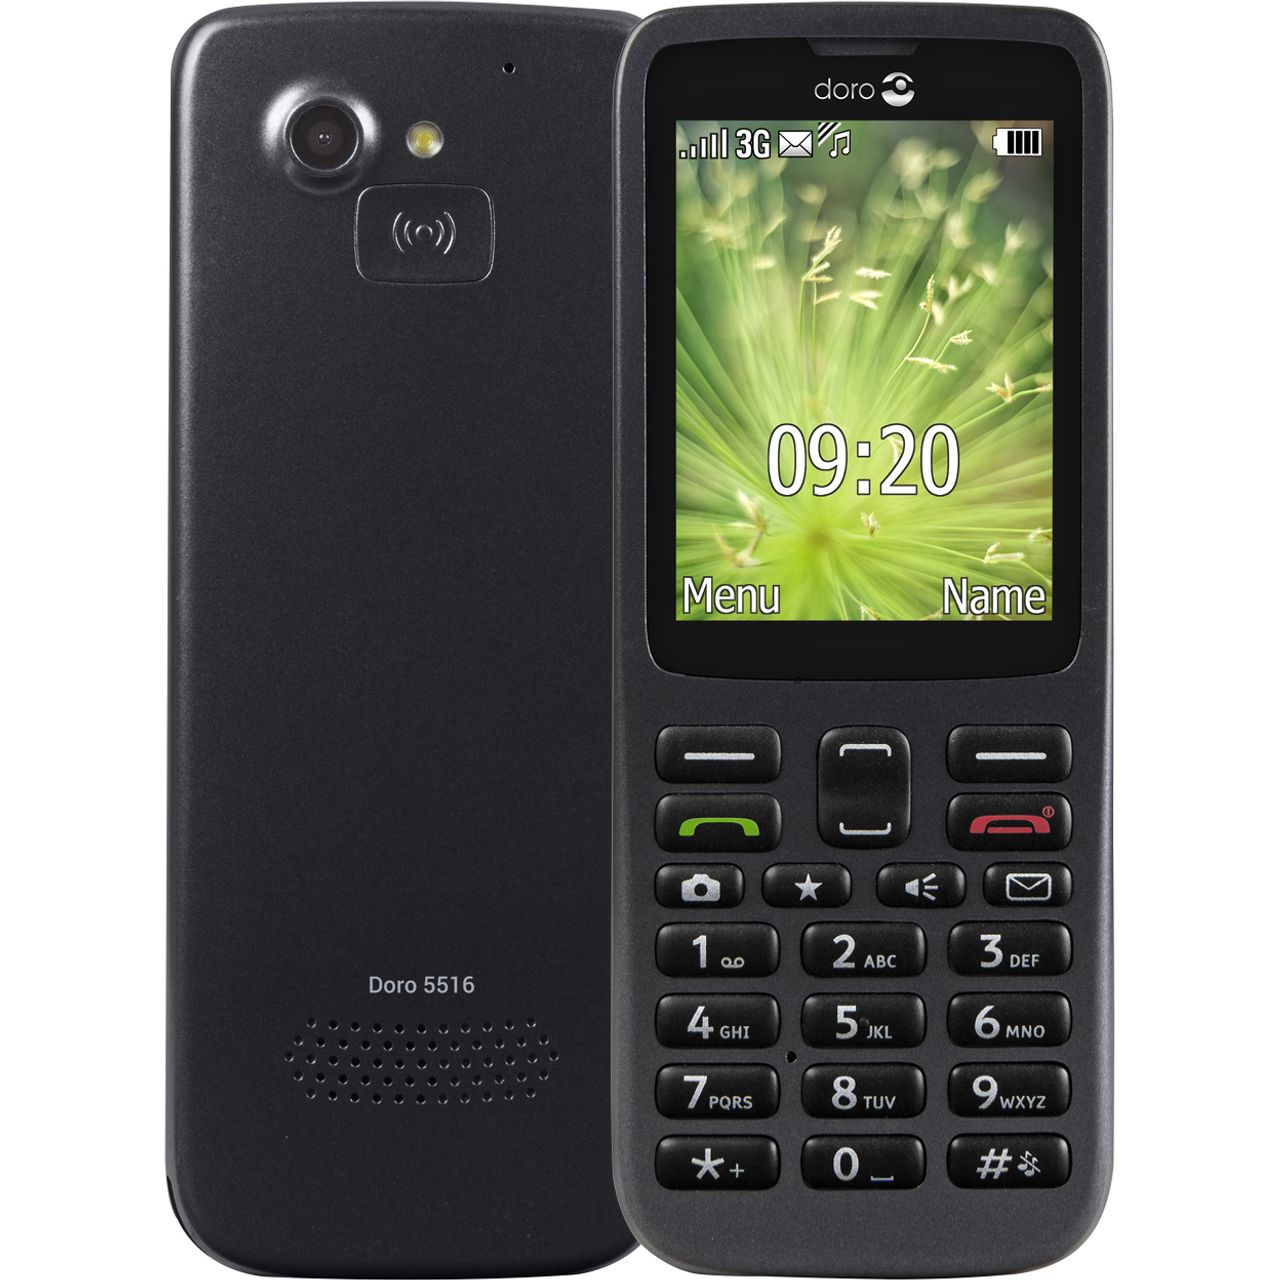 Doro 5516 Candy Bar Phone in Black Review